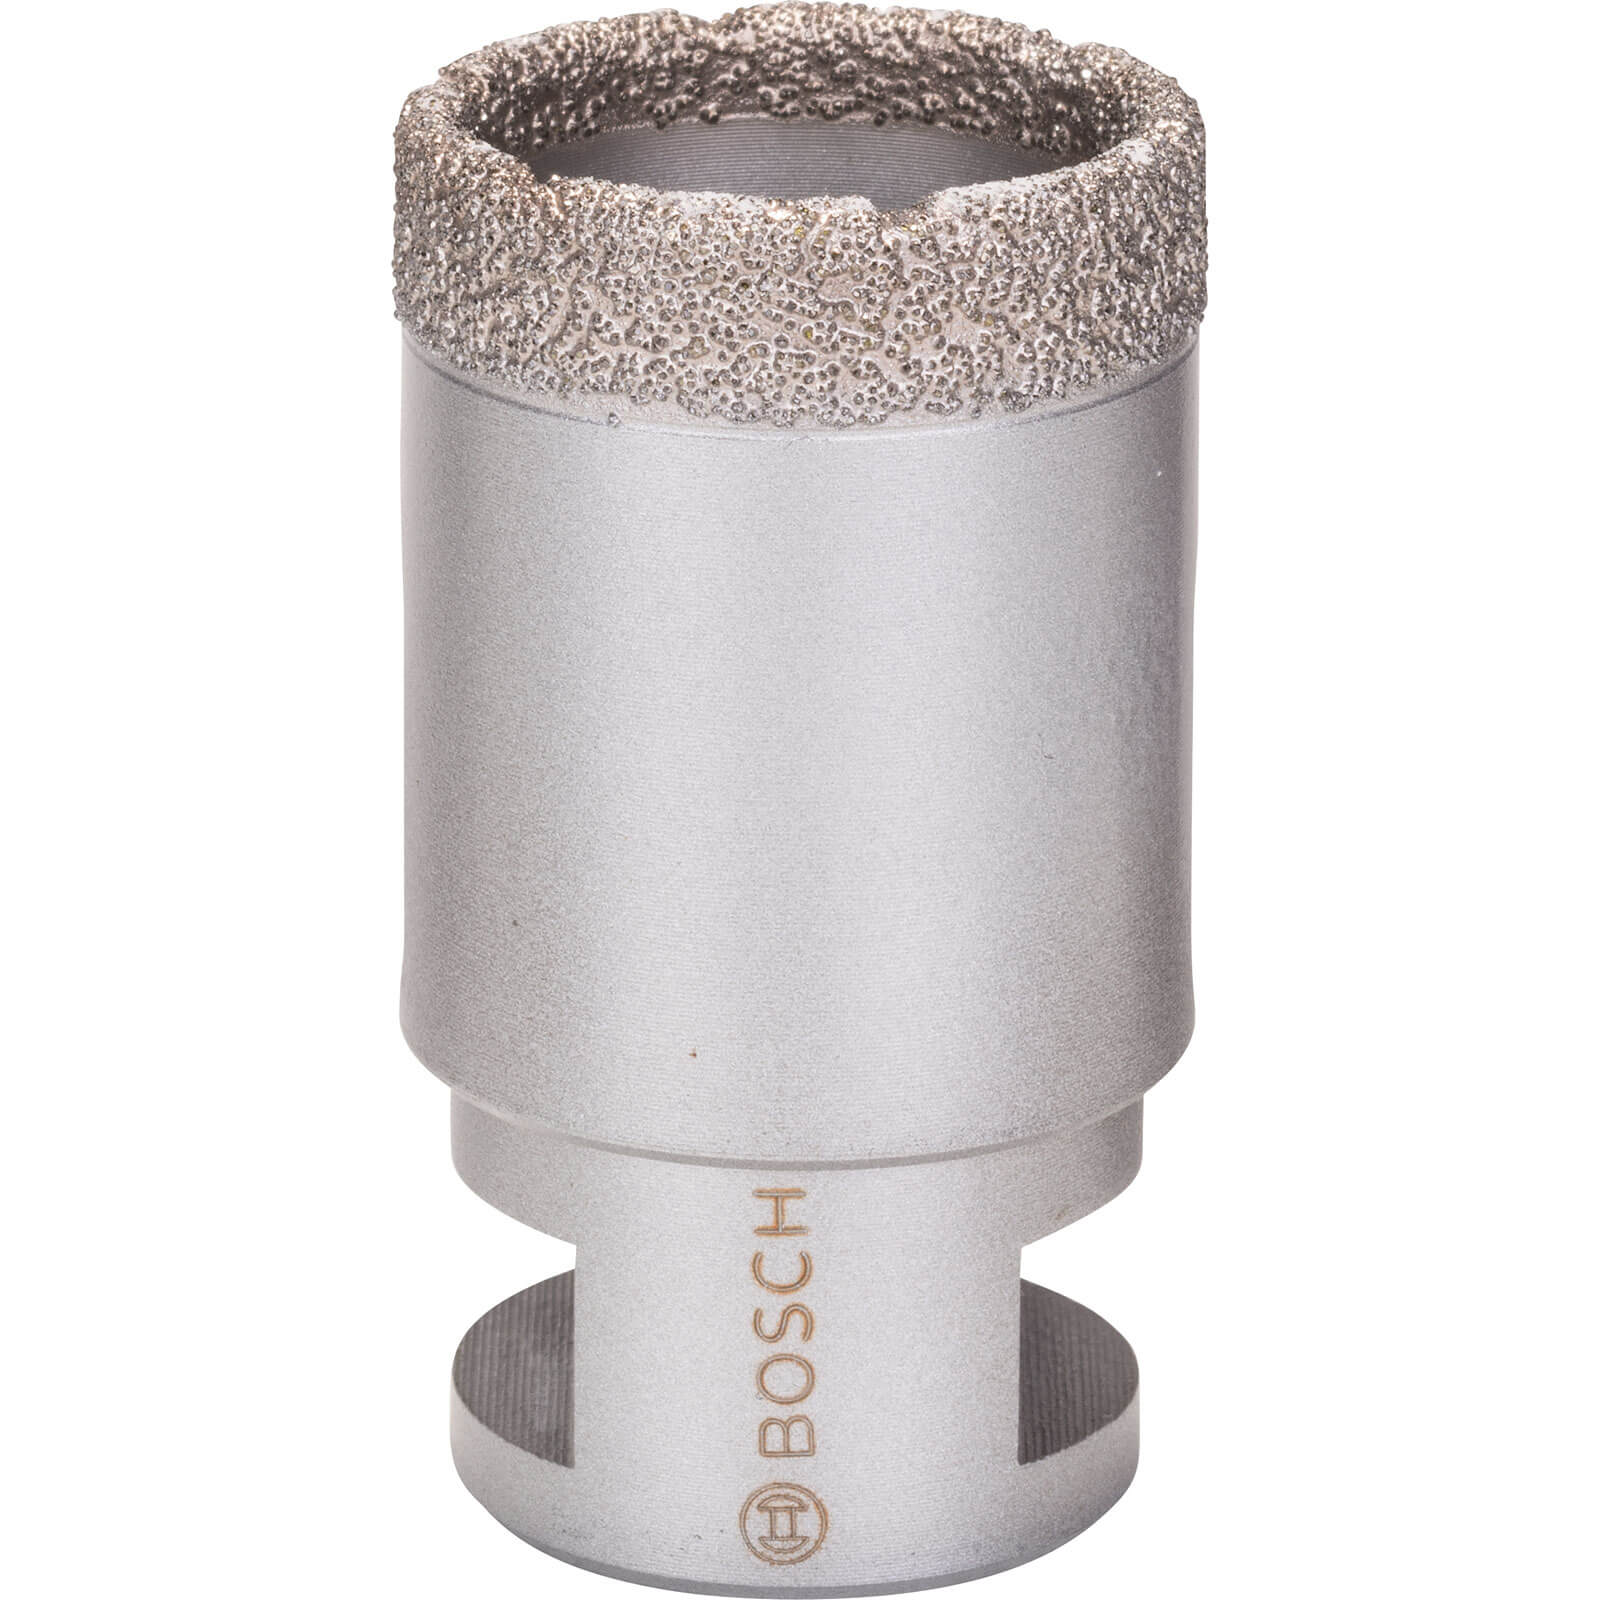 Photo of Bosch Angle Grinder Dry Diamond Hole Cutter For Ceramics 35mm